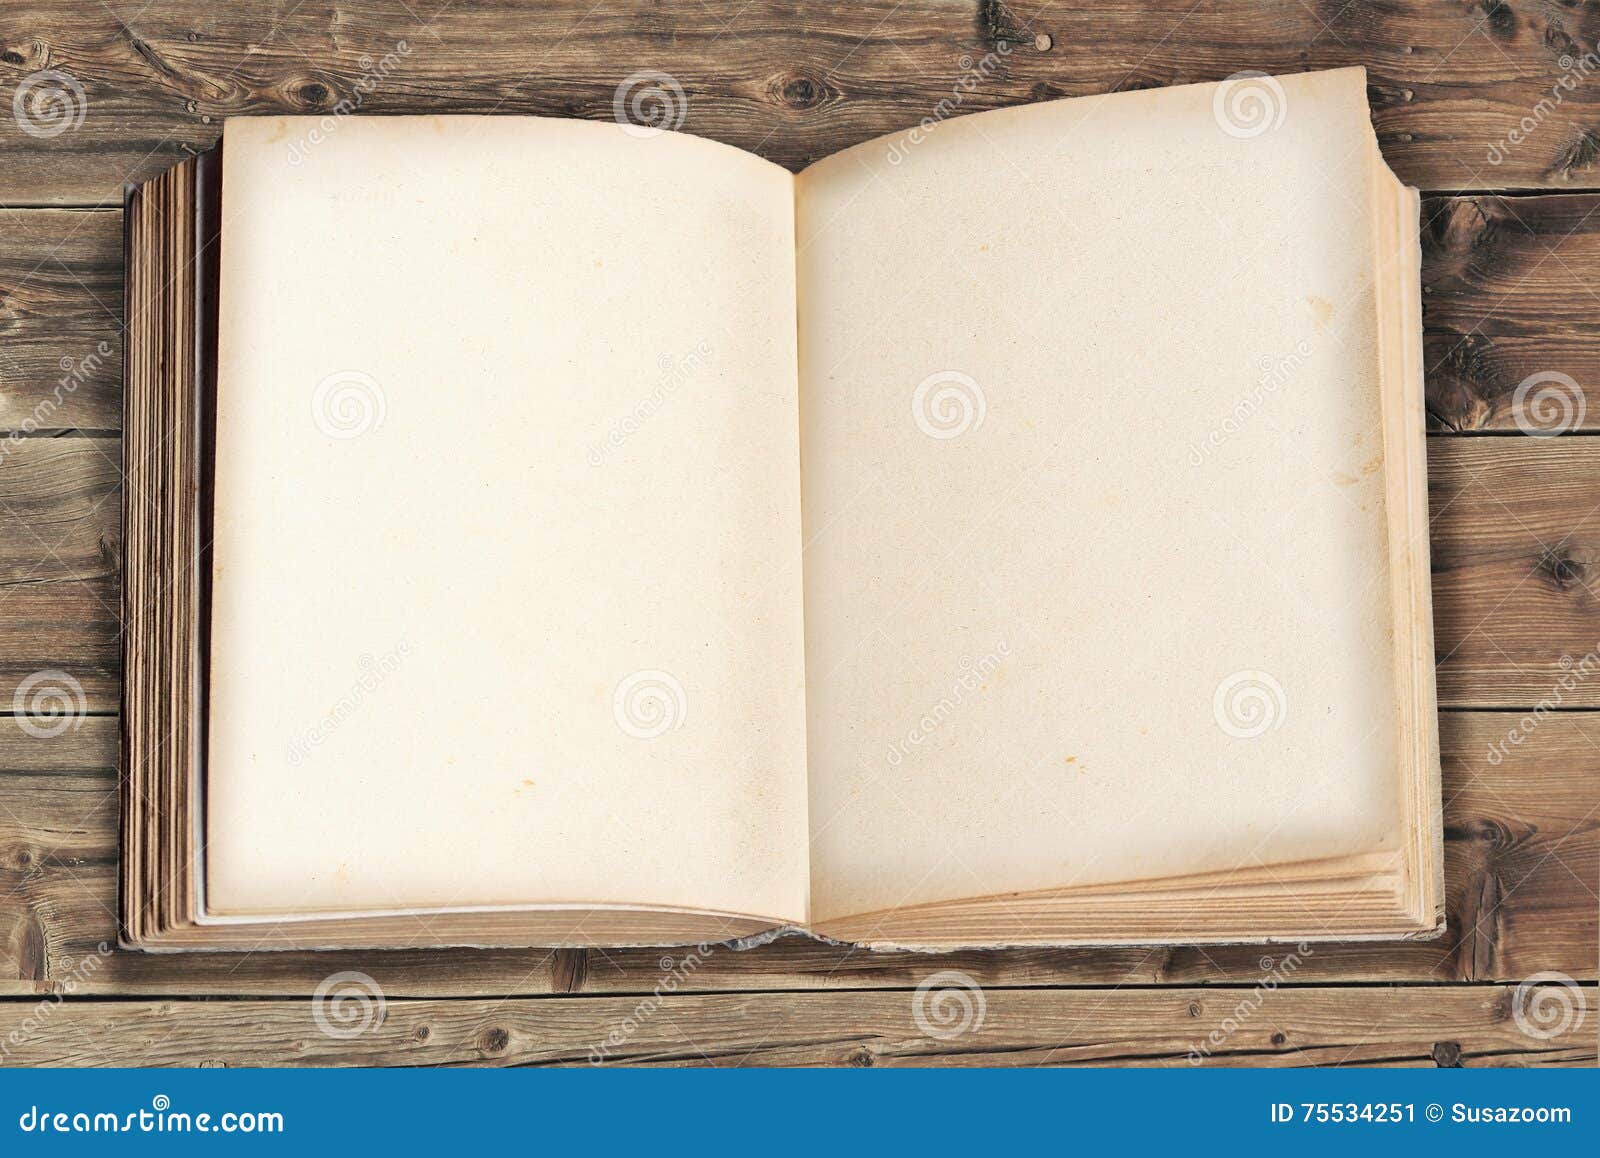 Opened Old Book With Empty Pages Stock Image - Image Of Library, Retro:  75534251